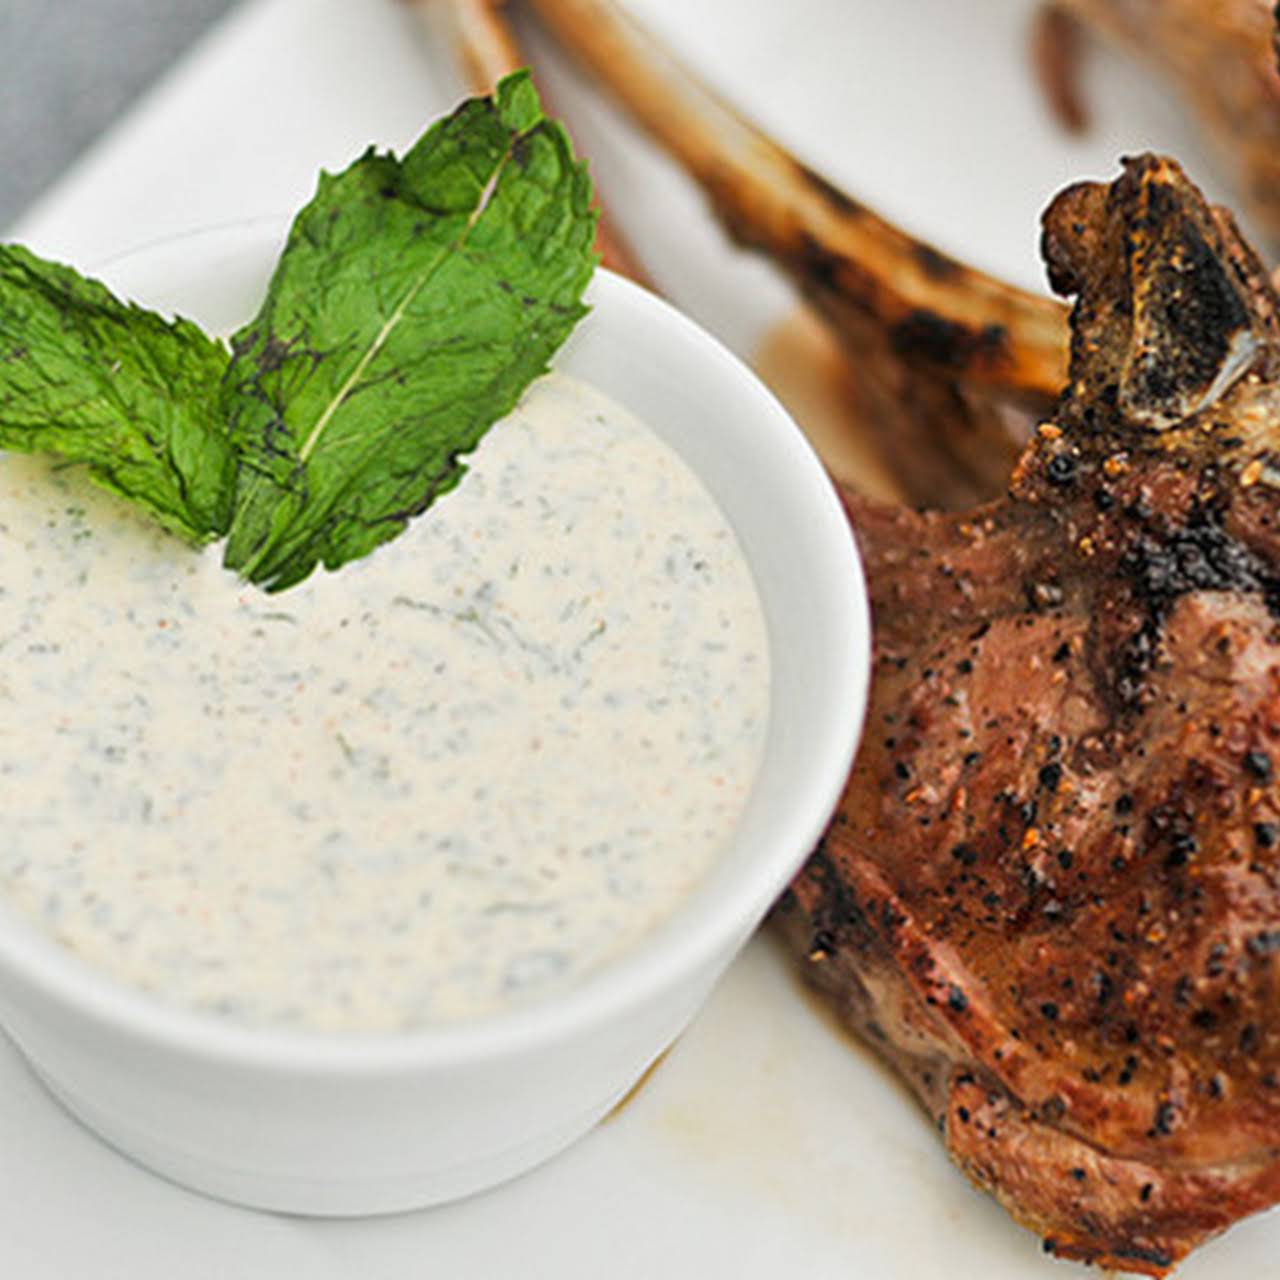 10 Best Mint Sauce with Dried Mint Recipes | Yummly